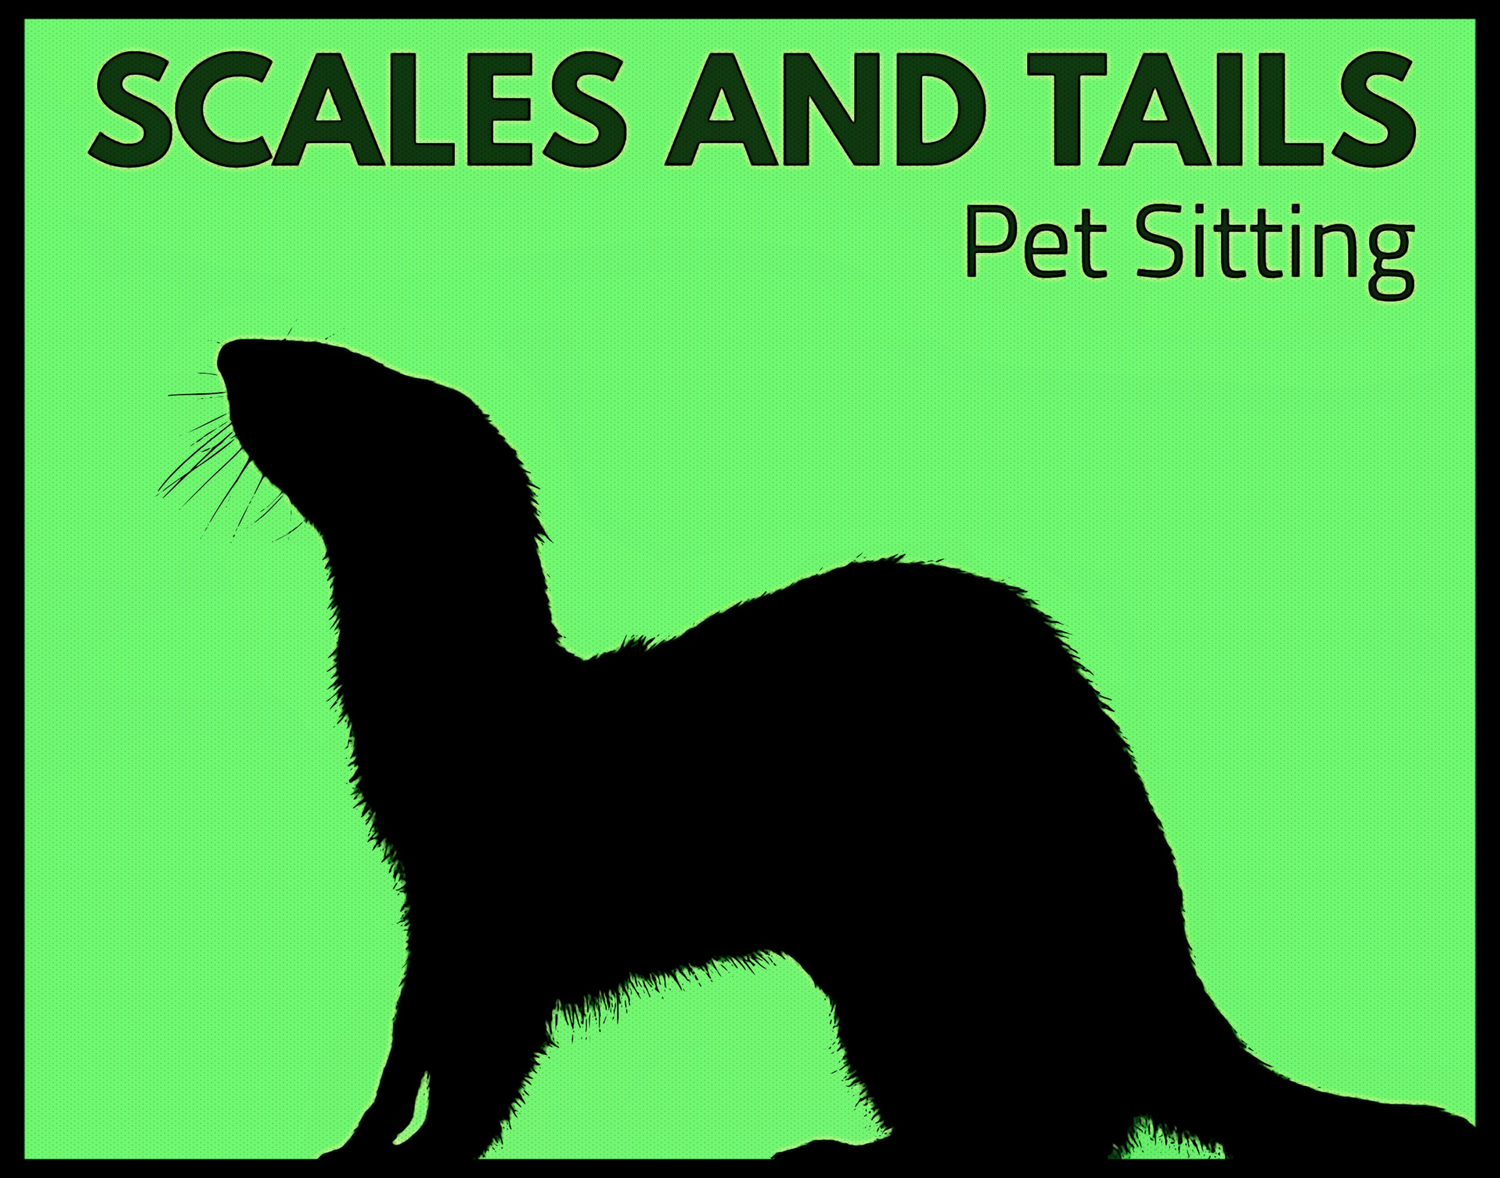 Scales and Tails Pet Sitting